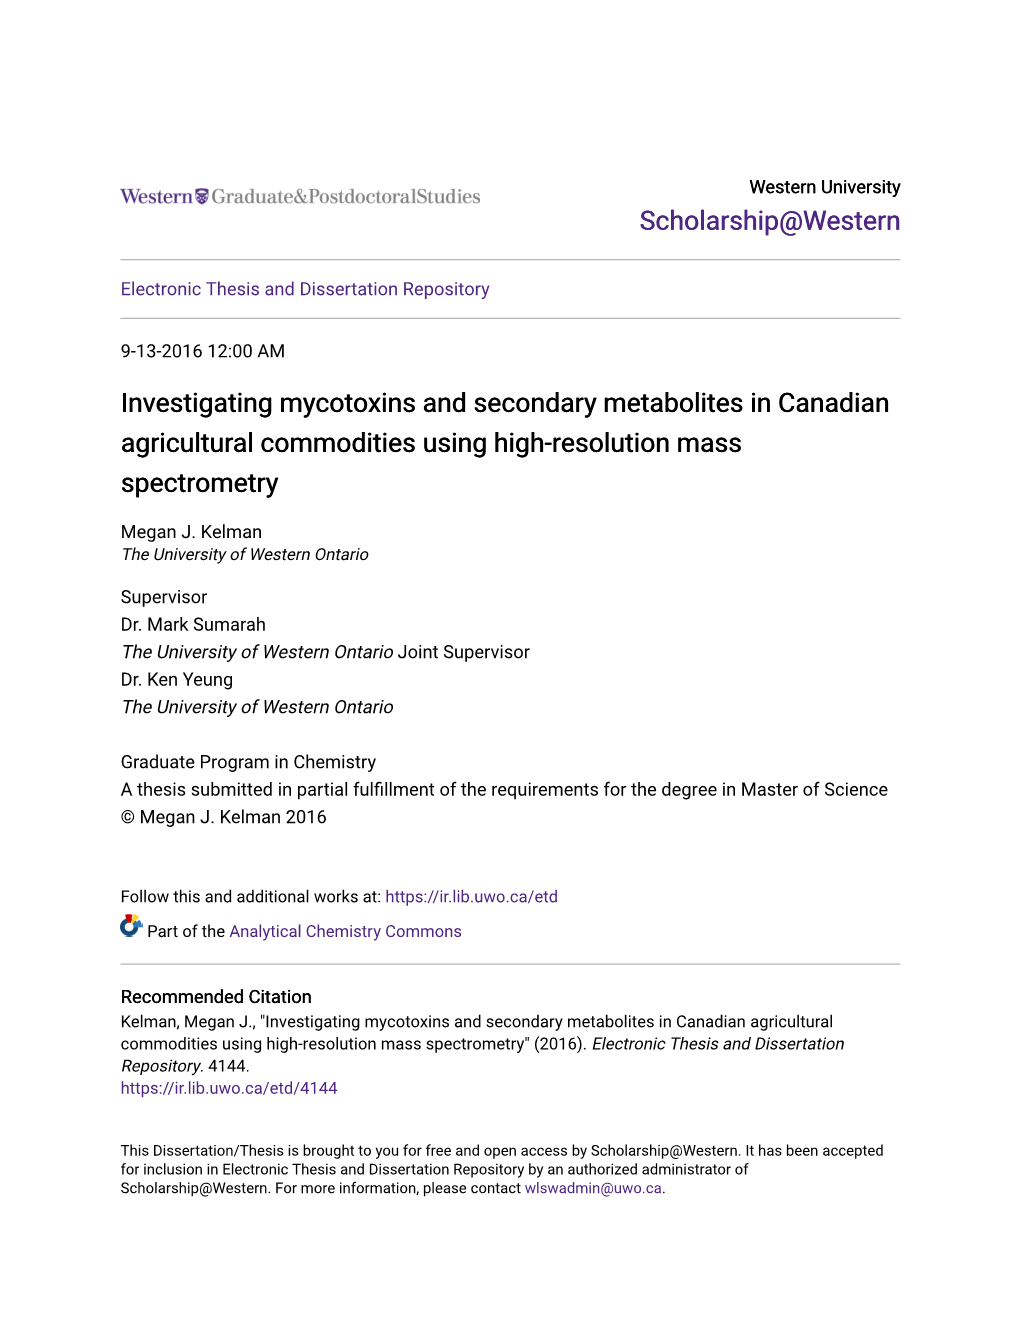 Investigating Mycotoxins and Secondary Metabolites in Canadian Agricultural Commodities Using High-Resolution Mass Spectrometry